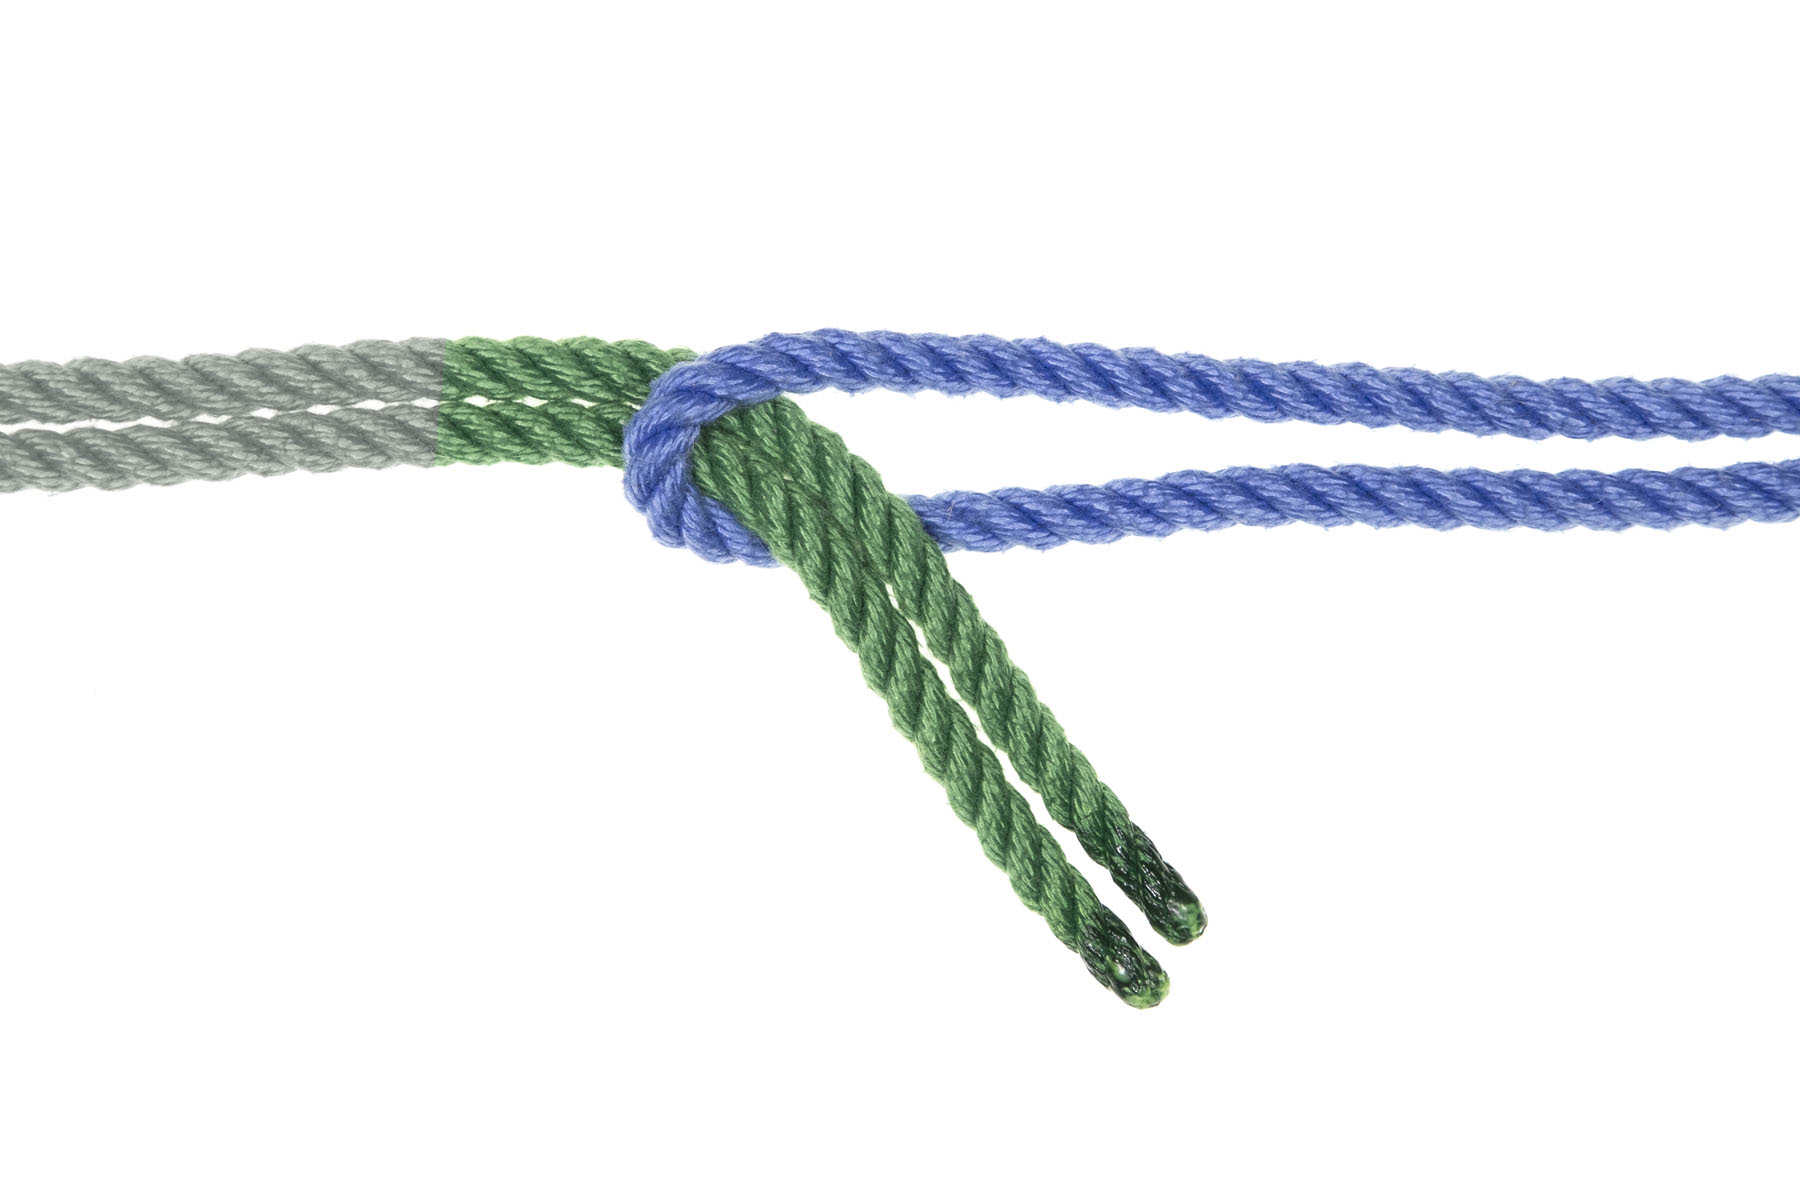 The ends of the green rope go through the bight of the blue rope, passing underneath it and then over it as they exit toward the bottom right.